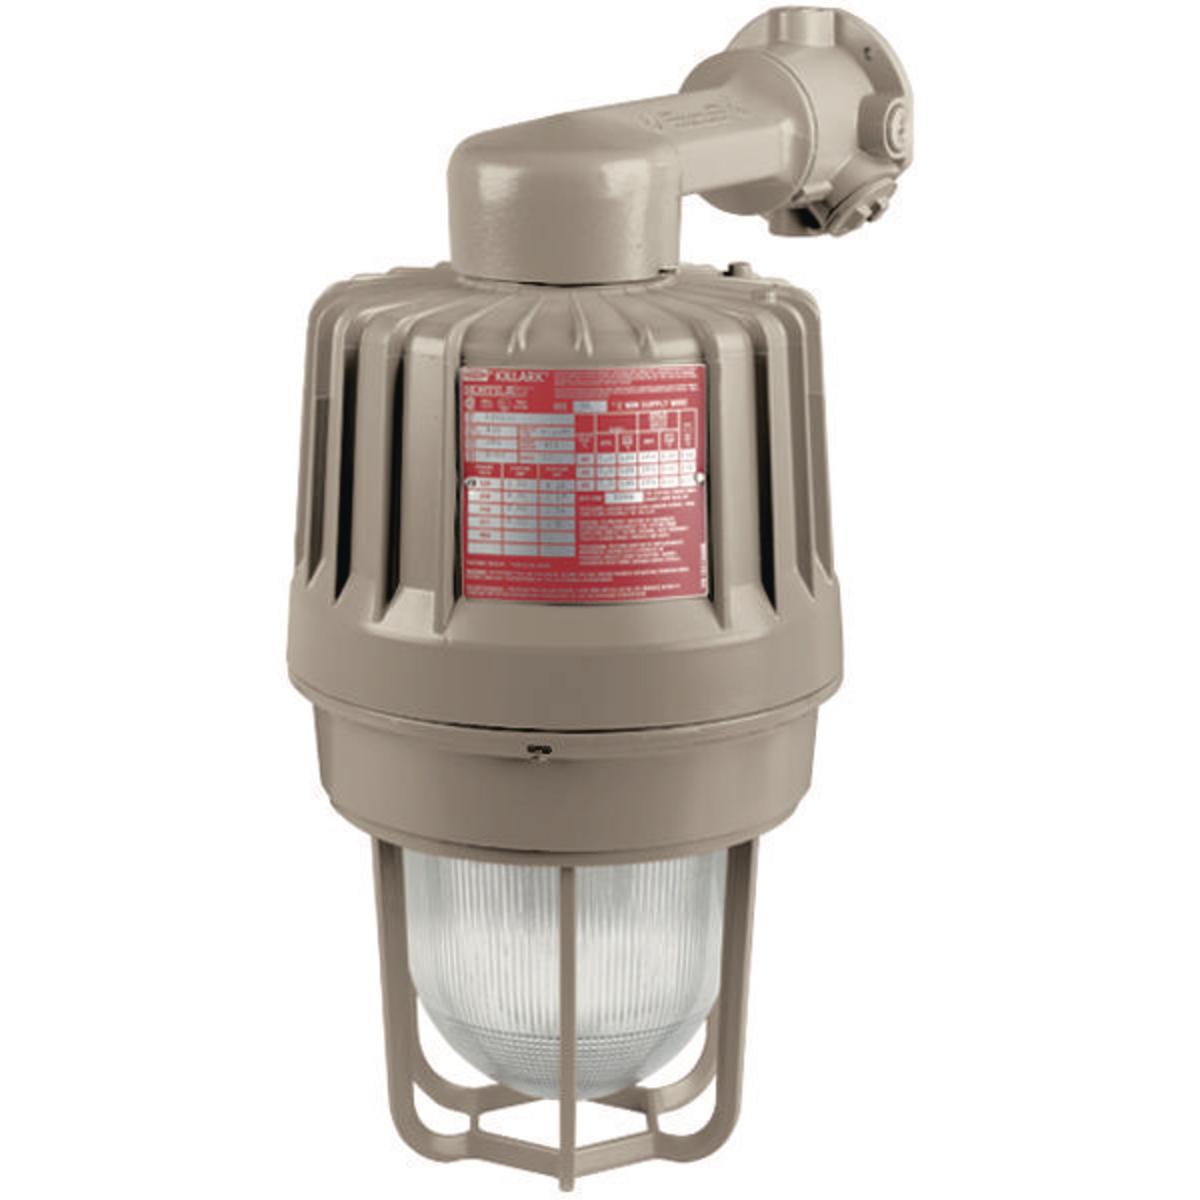 Hubbell EZP175B2G 175W 480V Pulse-Start Metal Halide 3/4" Wall Mount with Guard  ; Three light sources – High Pressure Sodium (50-400W), Metal Halide (70-400W) and Pulse Start Metal Halide (175-400W) ; Mounting choice –Pendant, ceiling, 25˚ stanchion or 90˚ wall mount, all